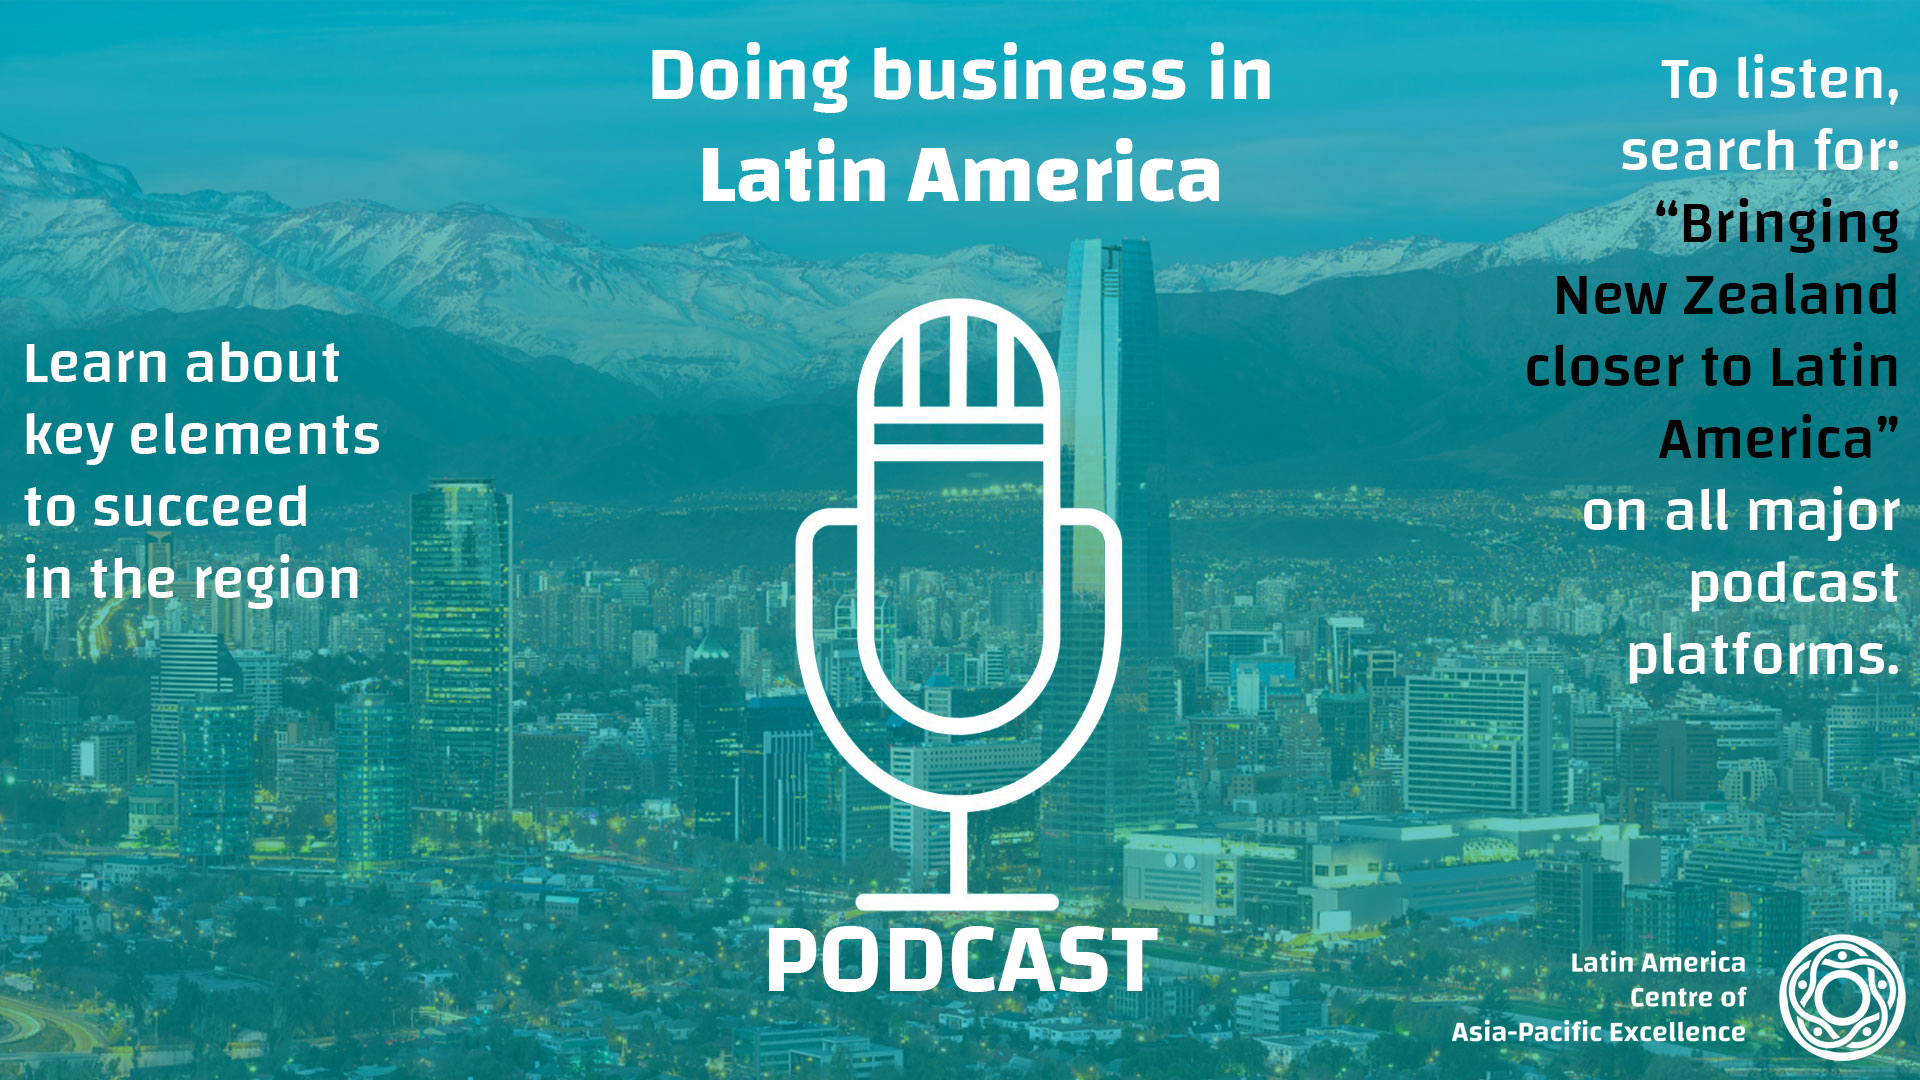 A banner image promoting the Doing Business In Latin America Podcast